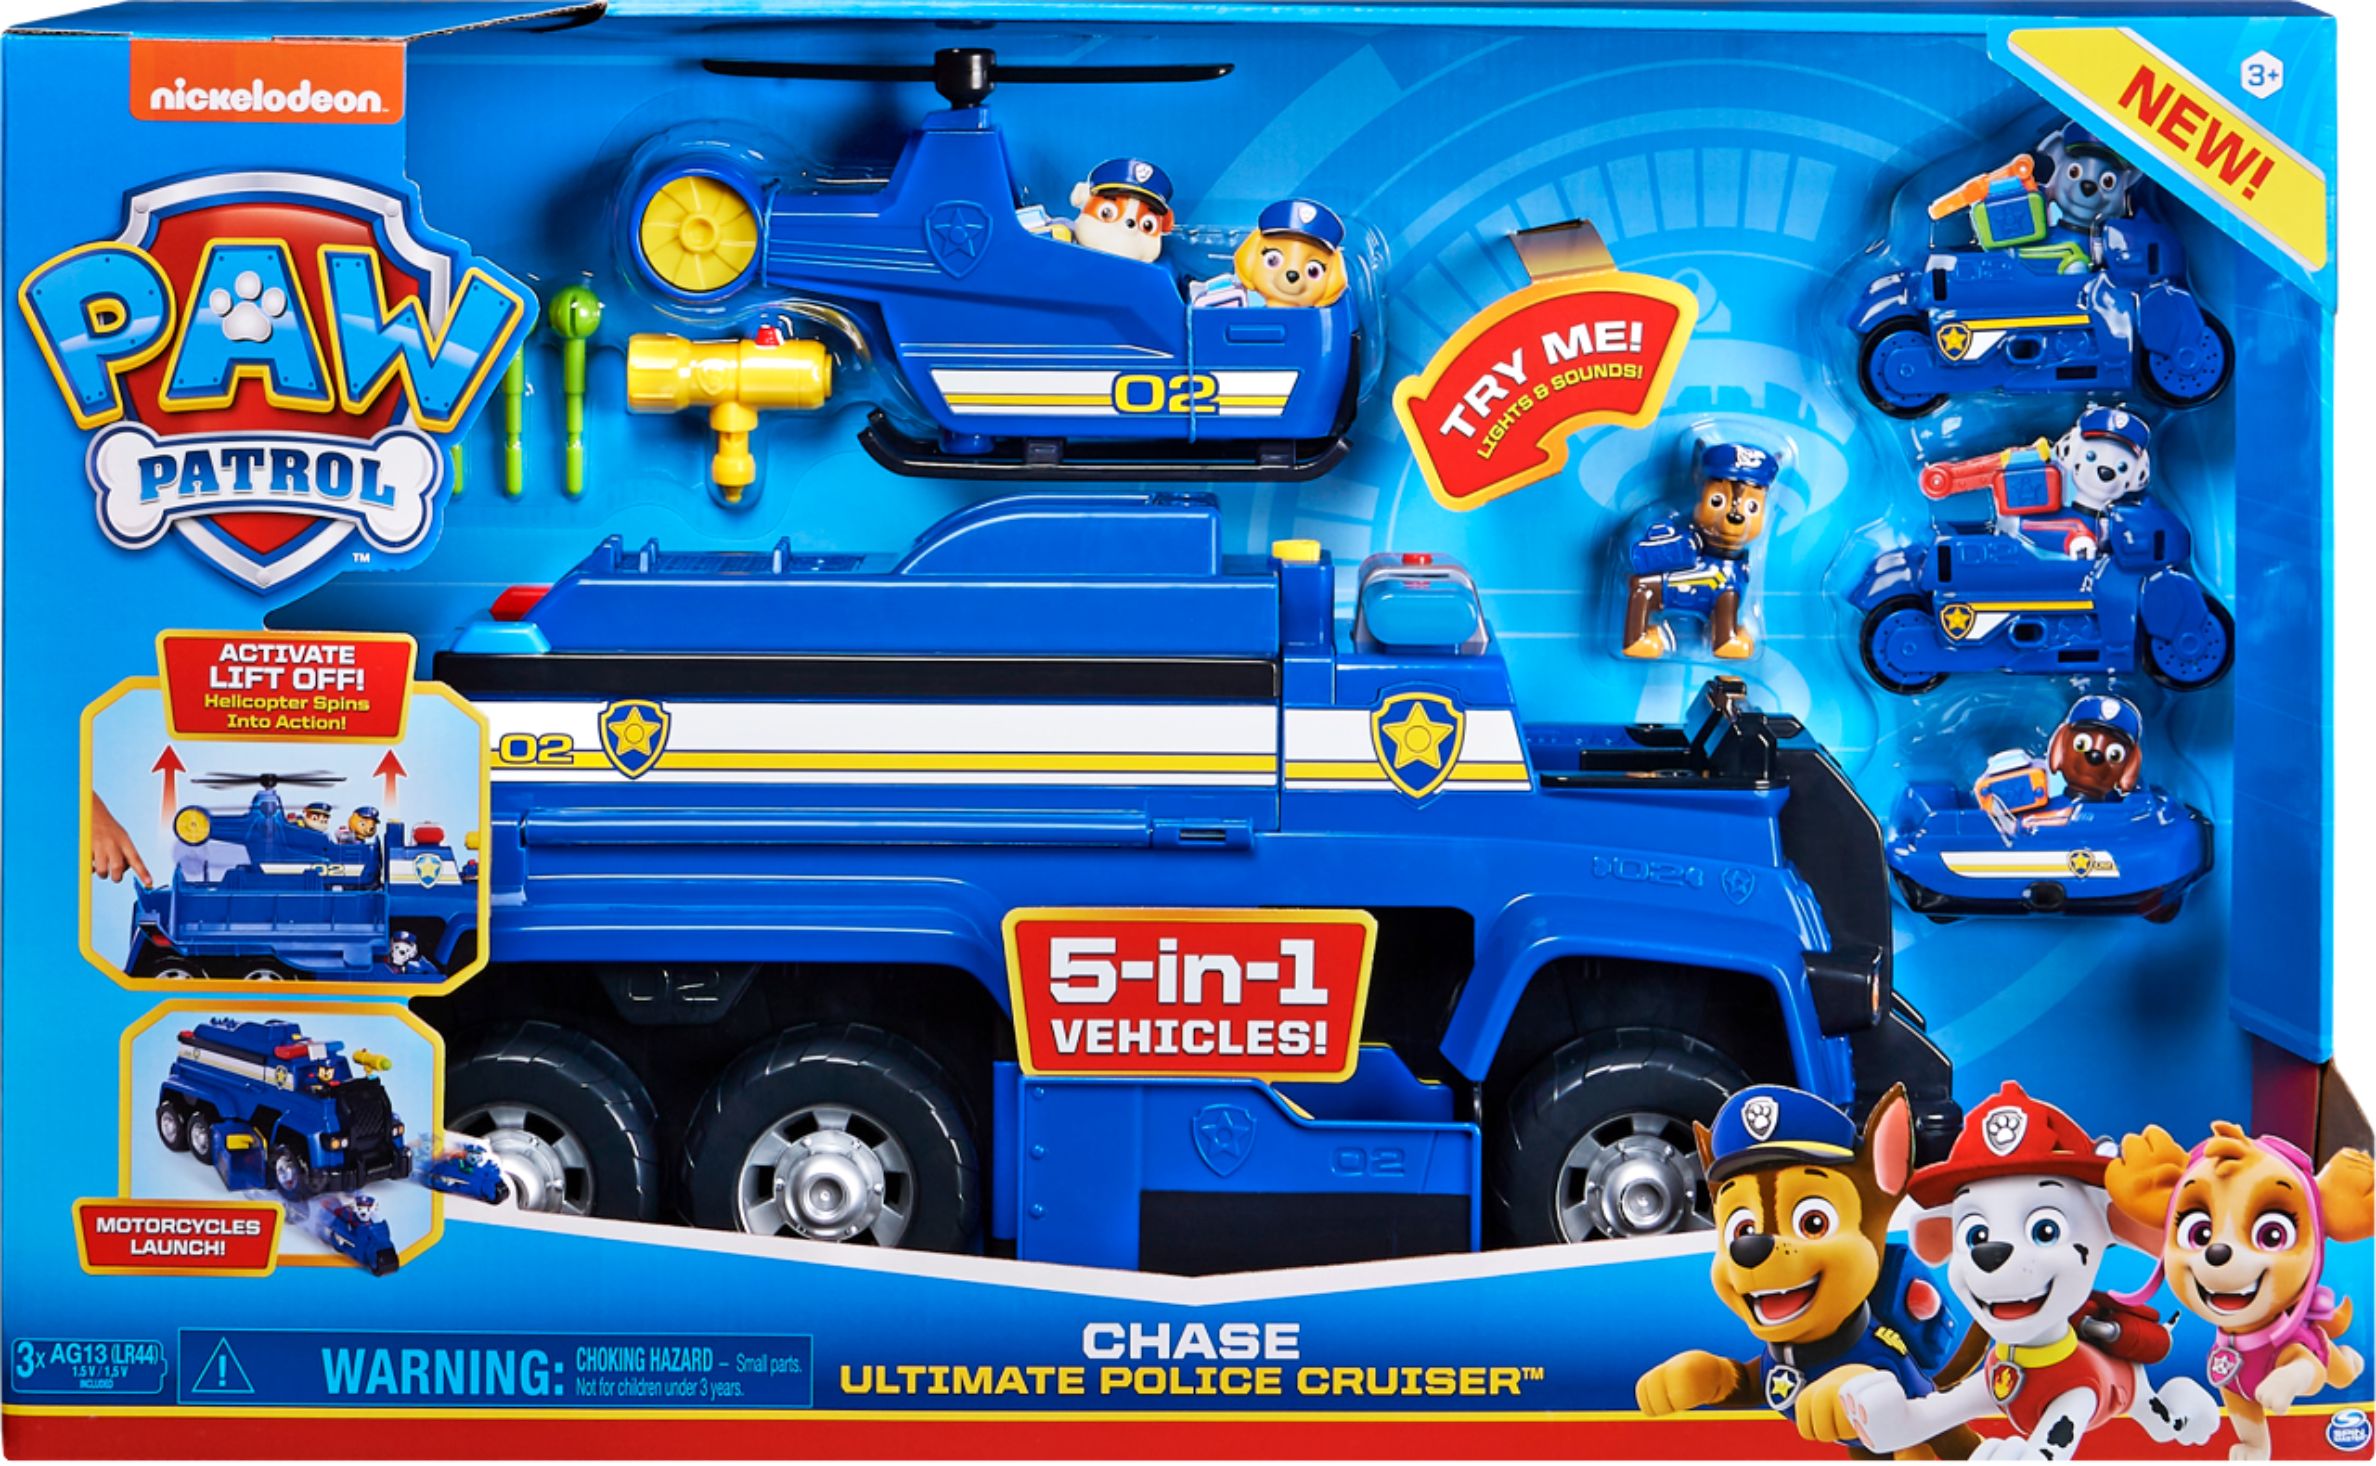 Paw Patrol - Chase’s 5-in-1 Ultimate Police Cruiser with Lights and Sounds, for Kids Aged 3 and Up